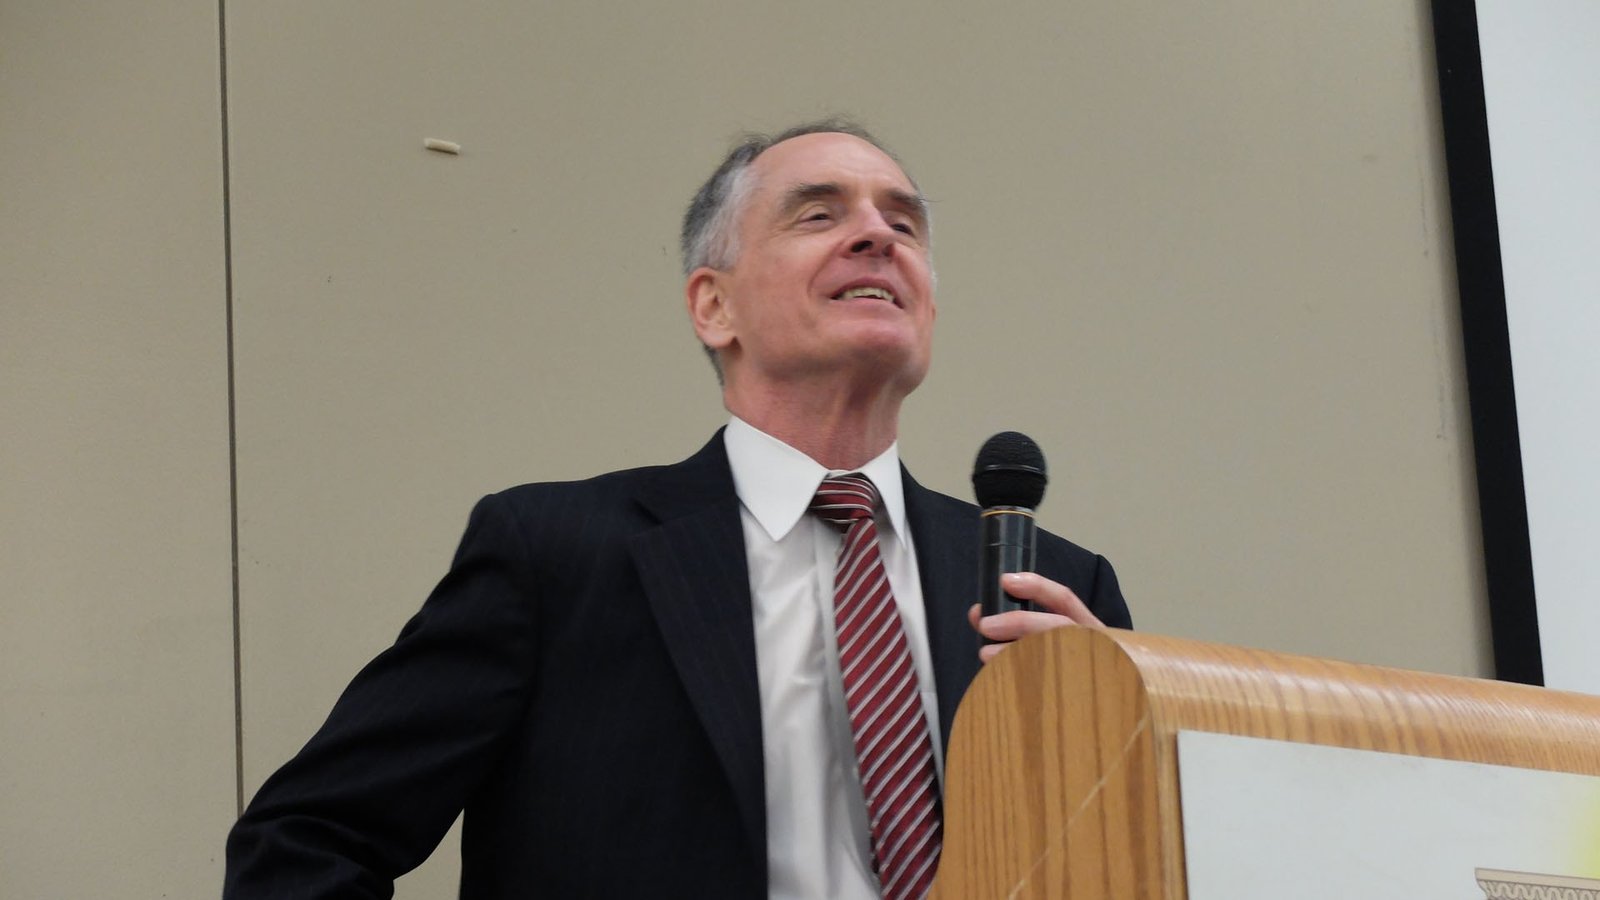 Student Group to Host White Nationalist Jared Taylor at University of Alabama